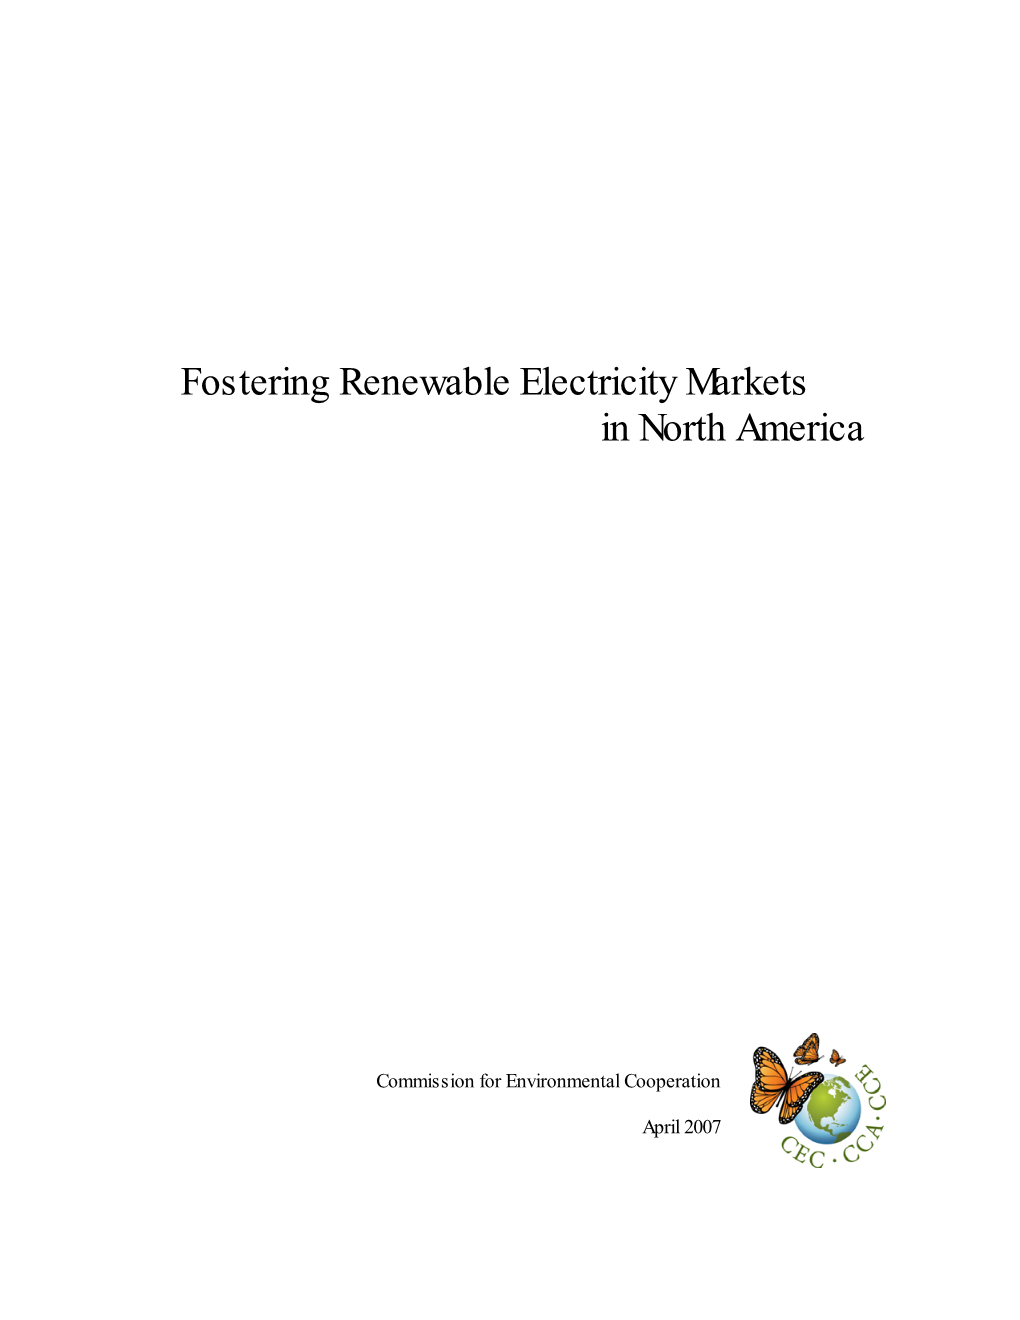 Fostering Renewable Electricity Markets in North America